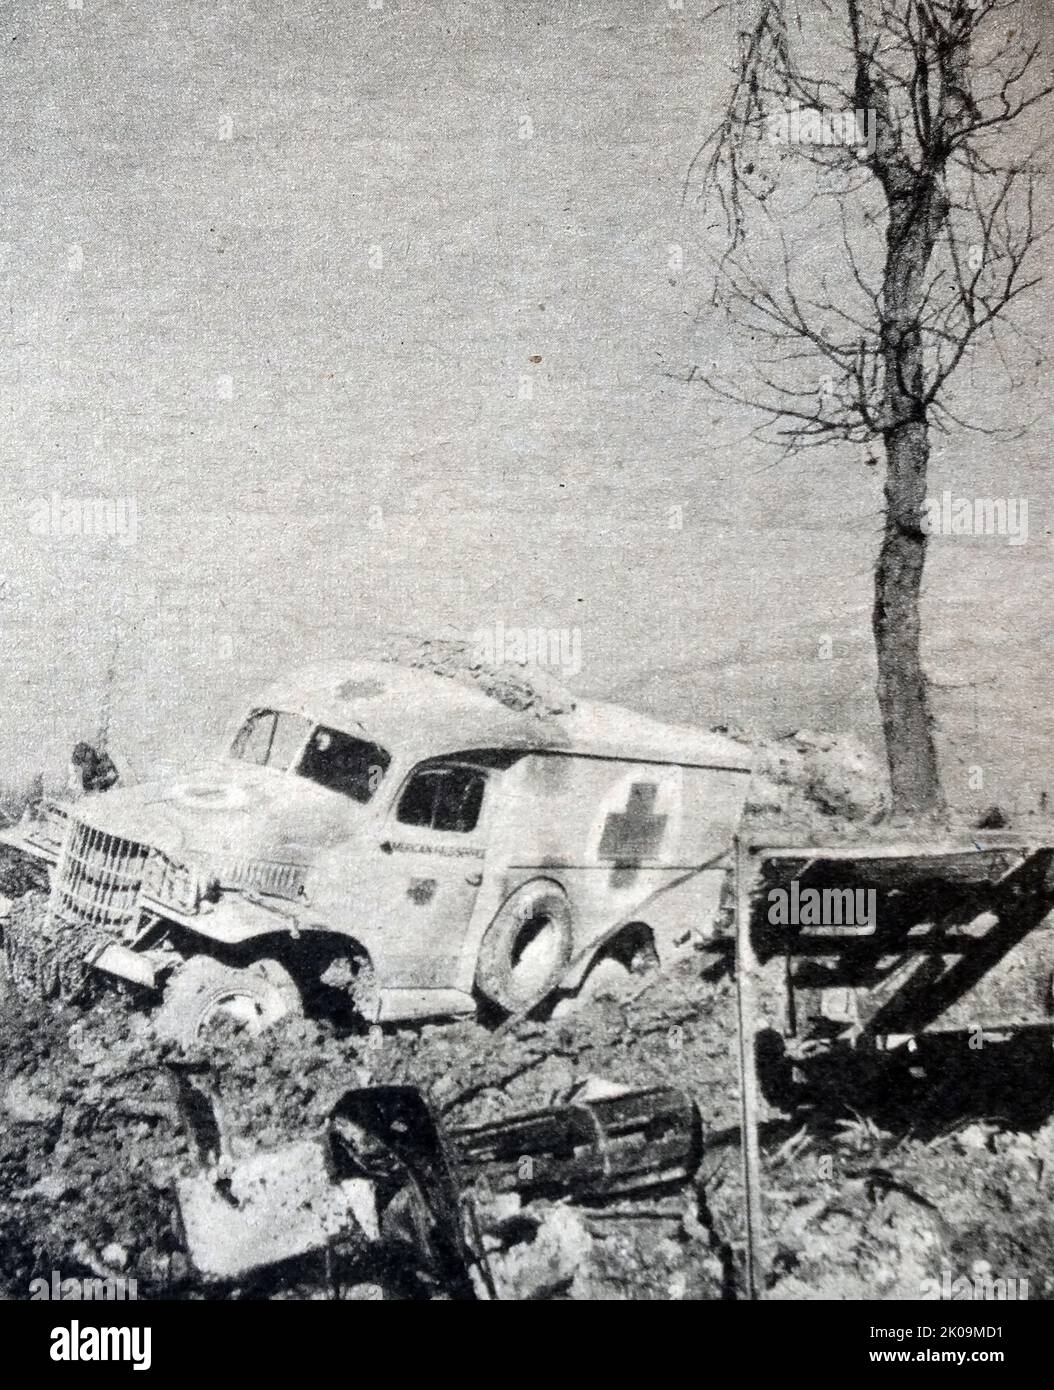 Anti-Personnel Bomb: A British Red Cross ambulance hit by a Messerschmitt during World War II. Messerschmitt AG was a German share-ownership limited, aircraft manufacturing corporation named after its chief designer Willy Messerschmitt, and known primarily for its World War II fighter aircraft, in particular the Bf 109 and Me 262. Stock Photo